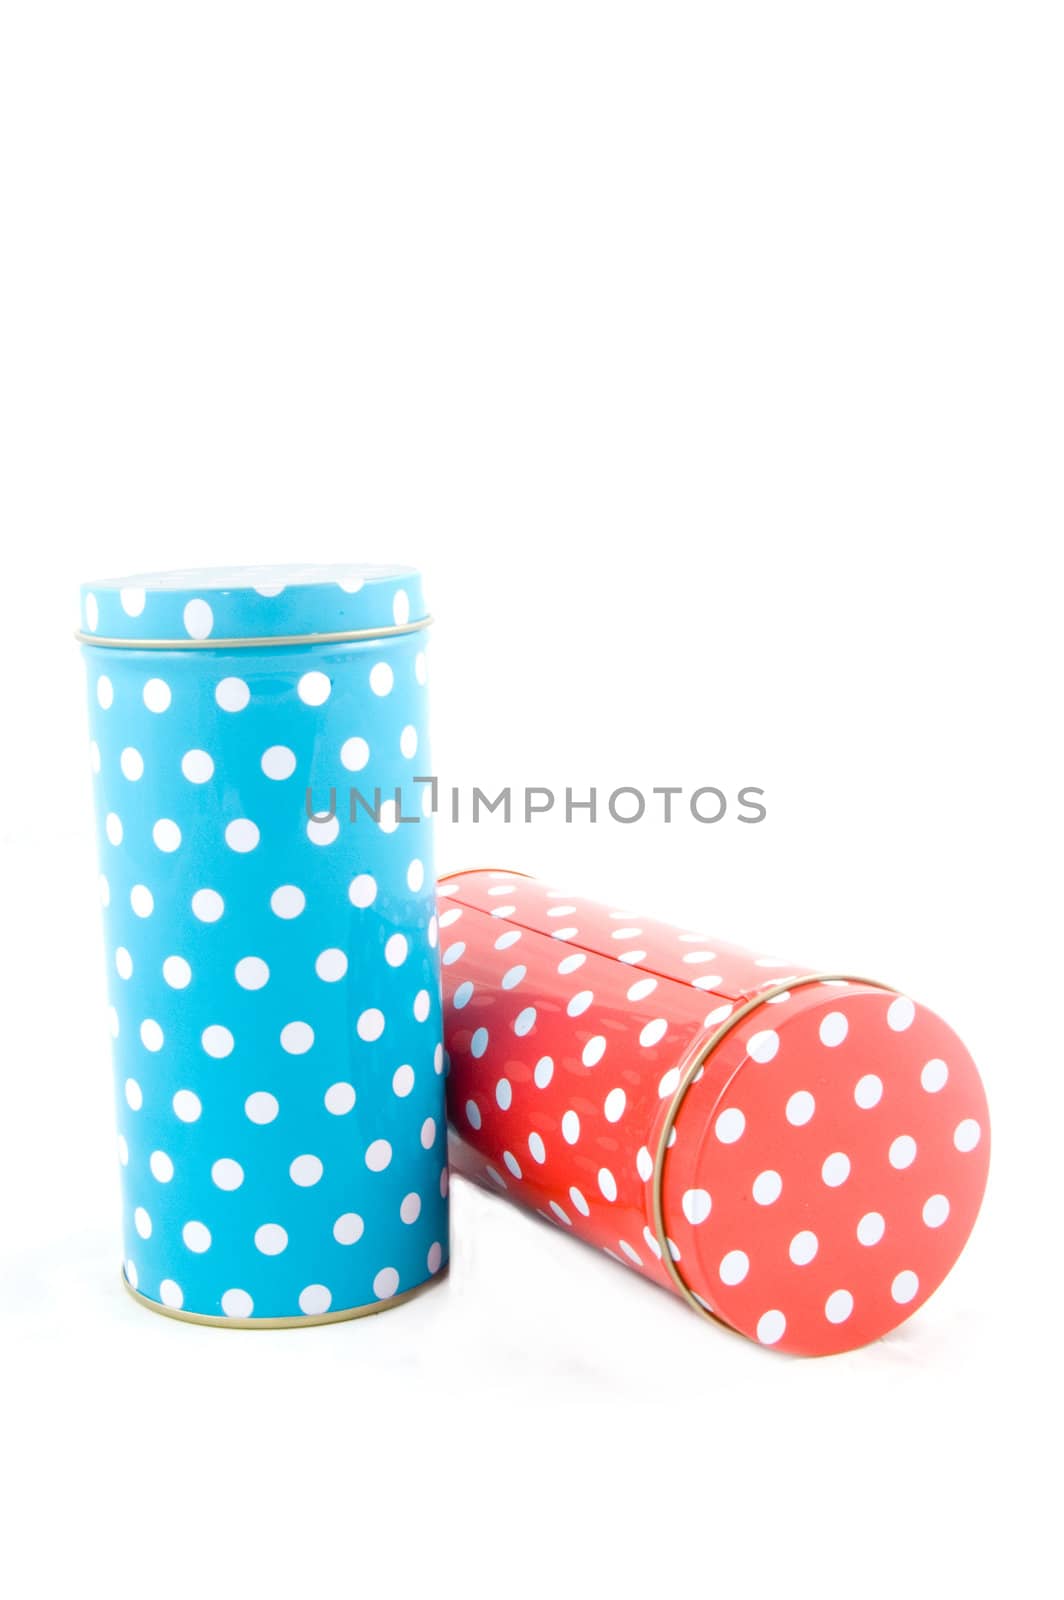 coloful dotted tins by ladyminnie